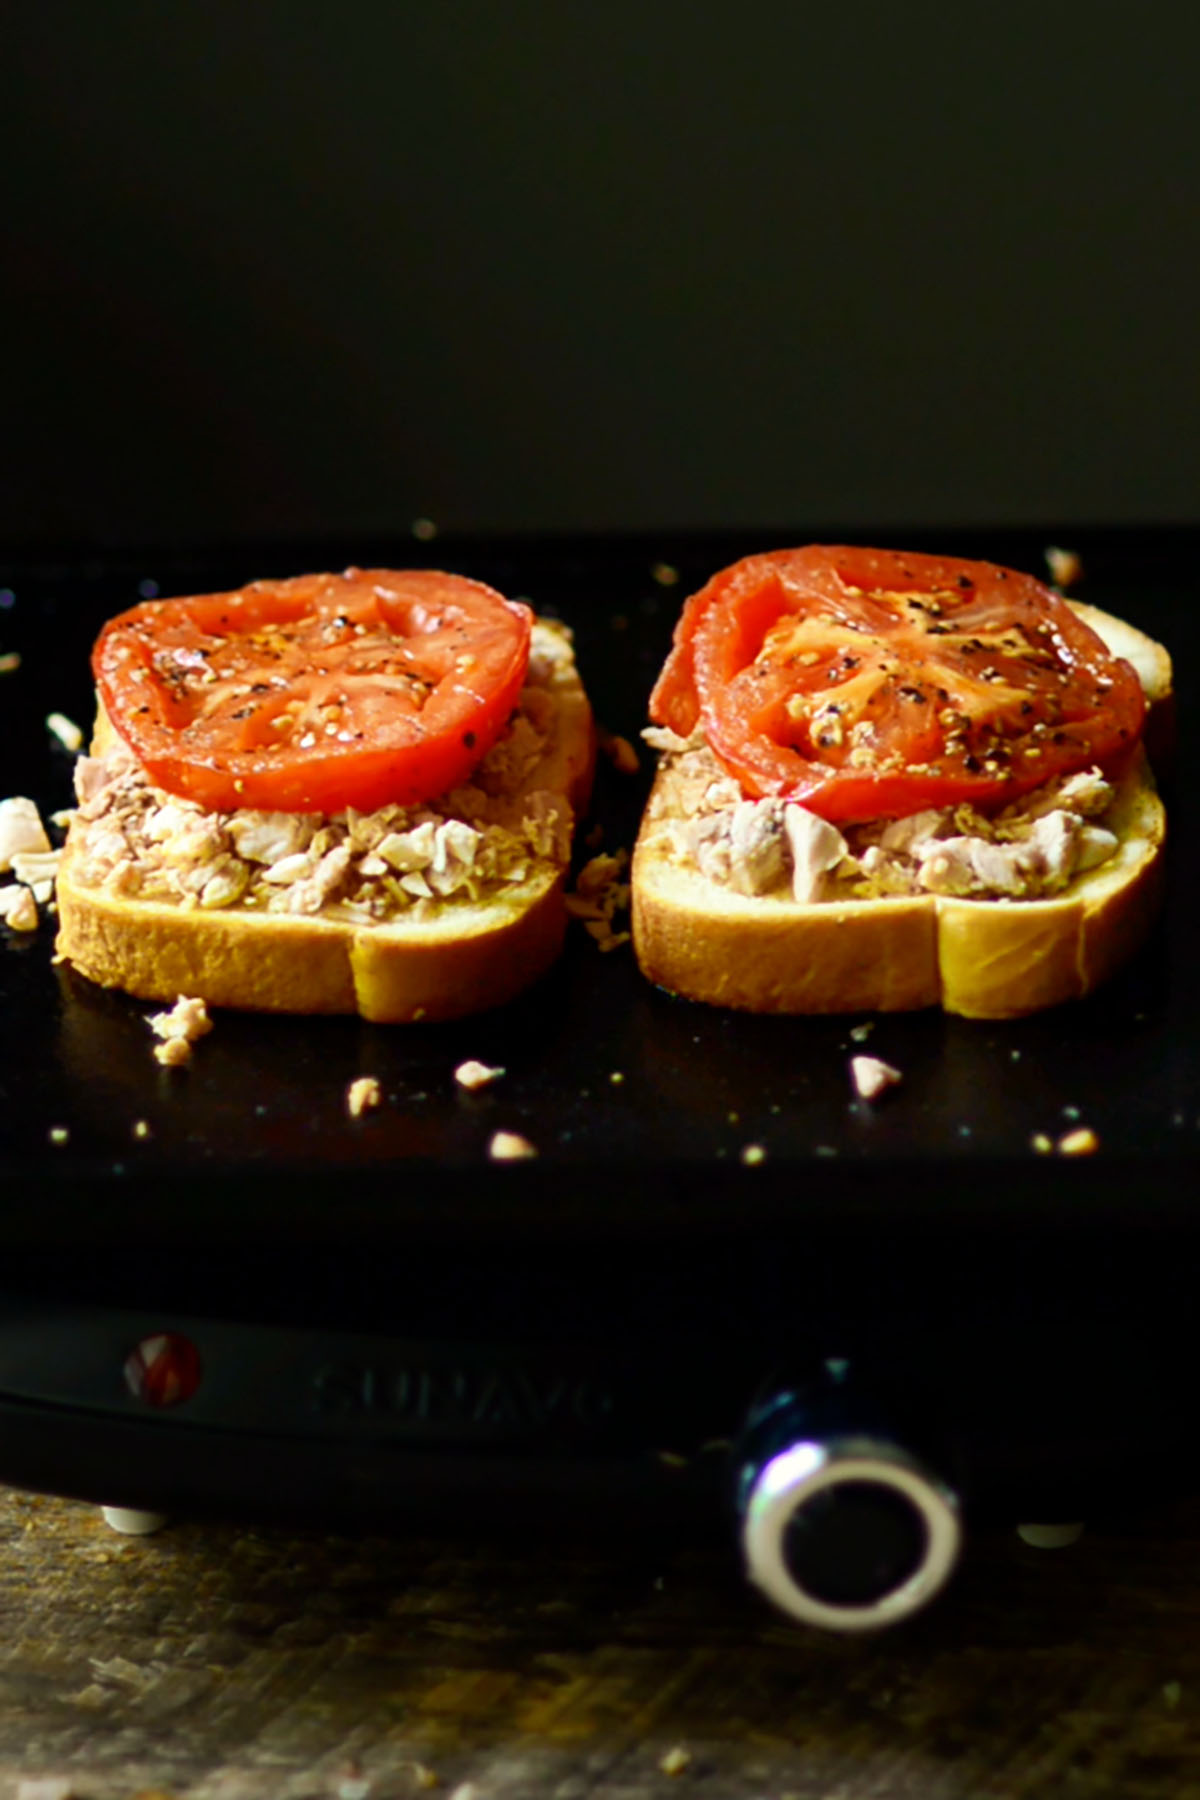 Sliced Texas toast on a cast iron griddle topped with chopped turkey and a slice of tomato.